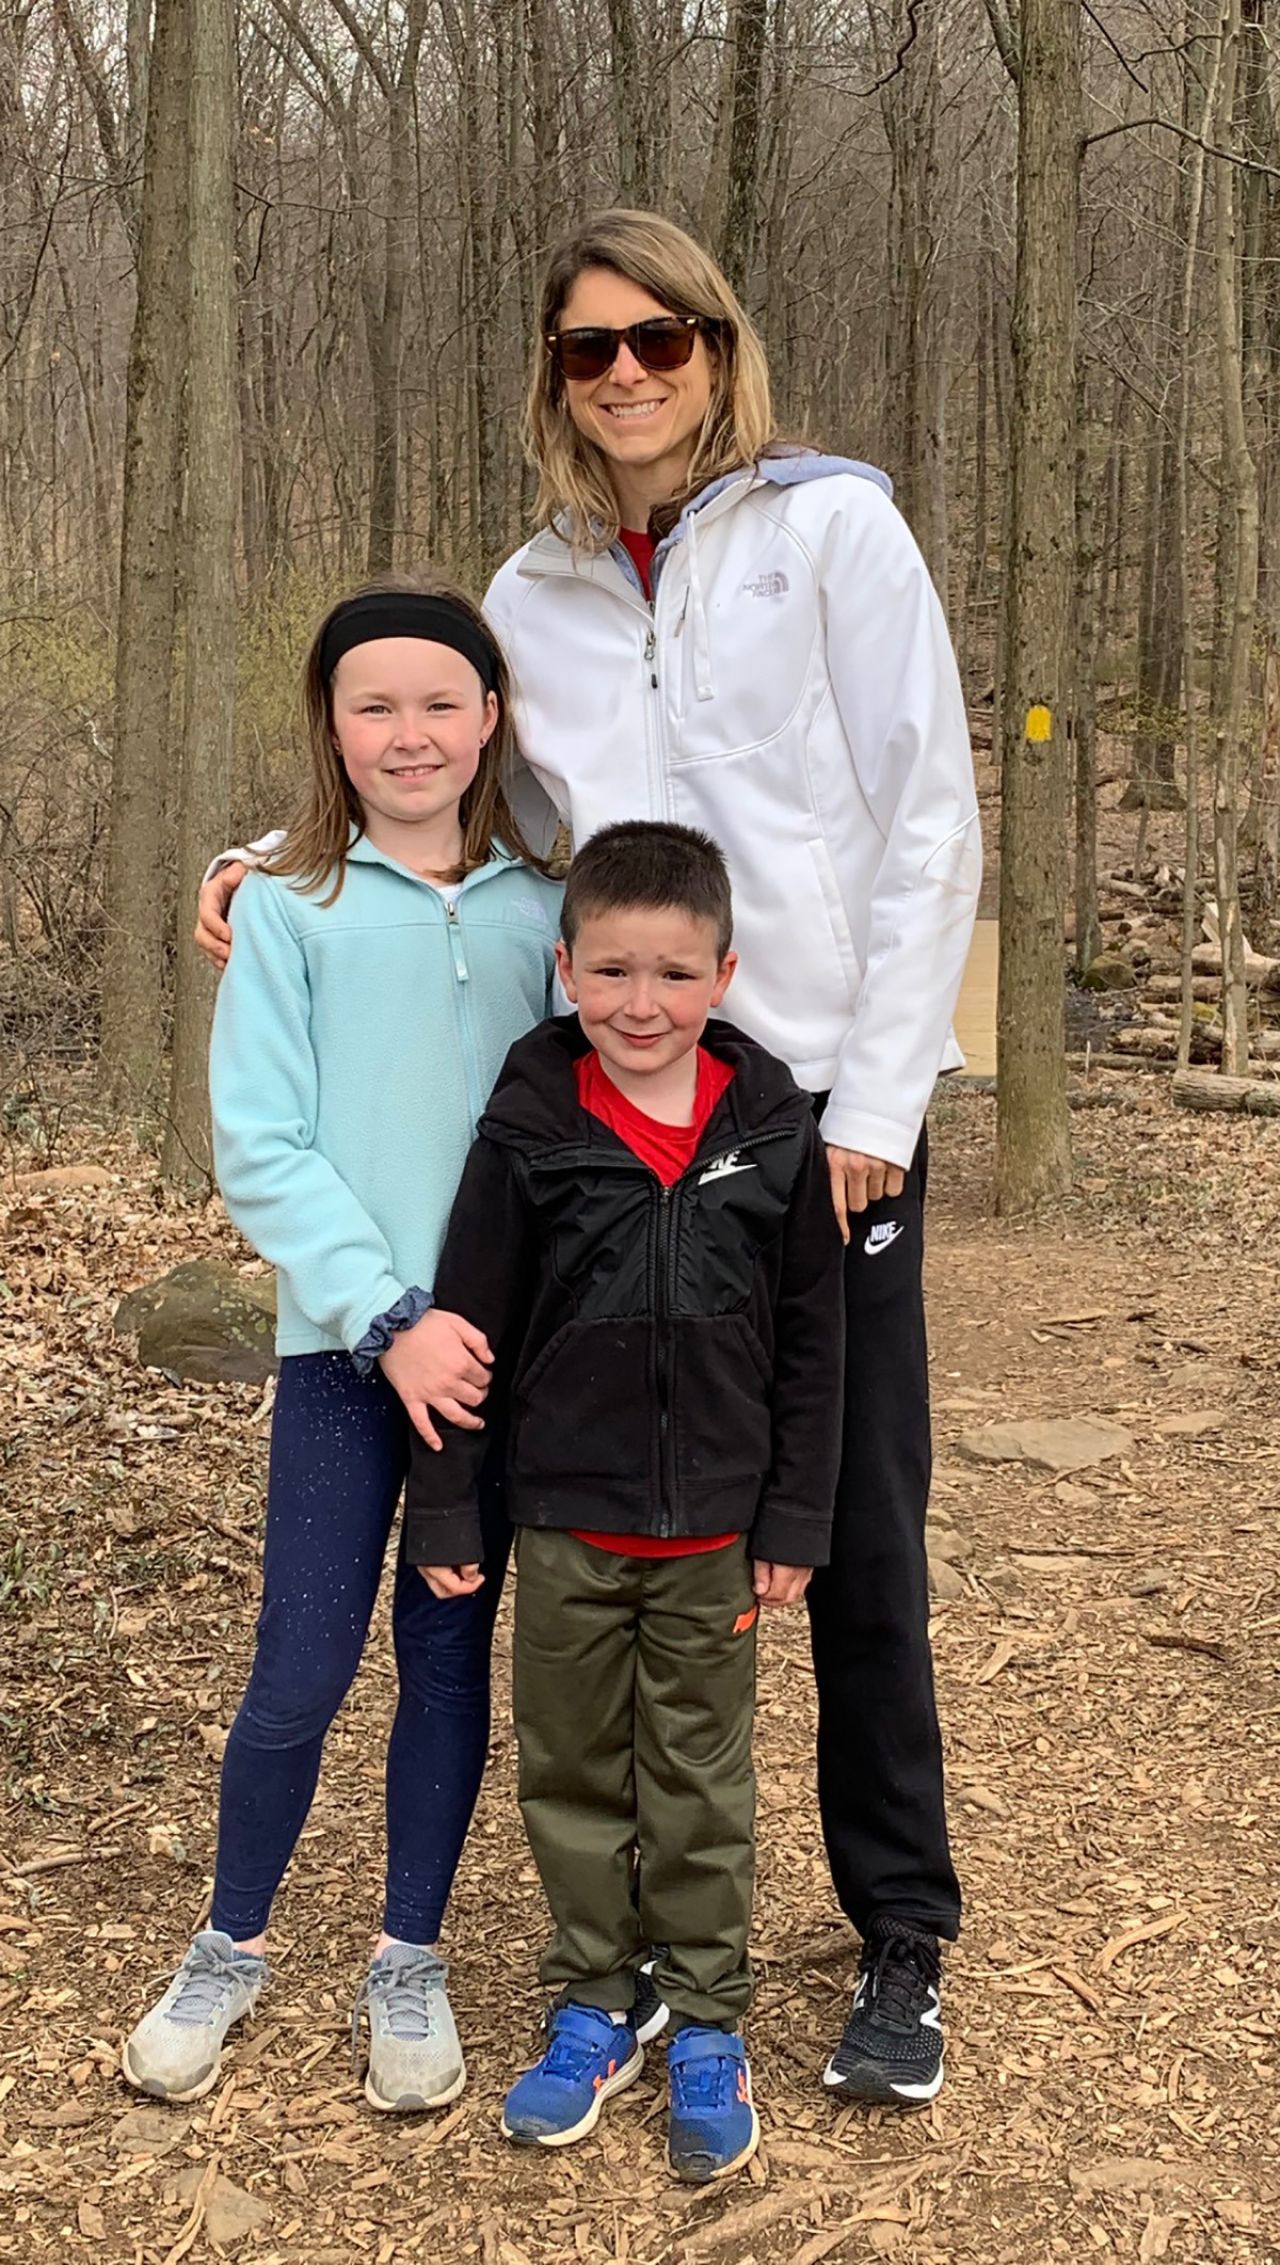 Amanda Gifford standing in the woods with her two children